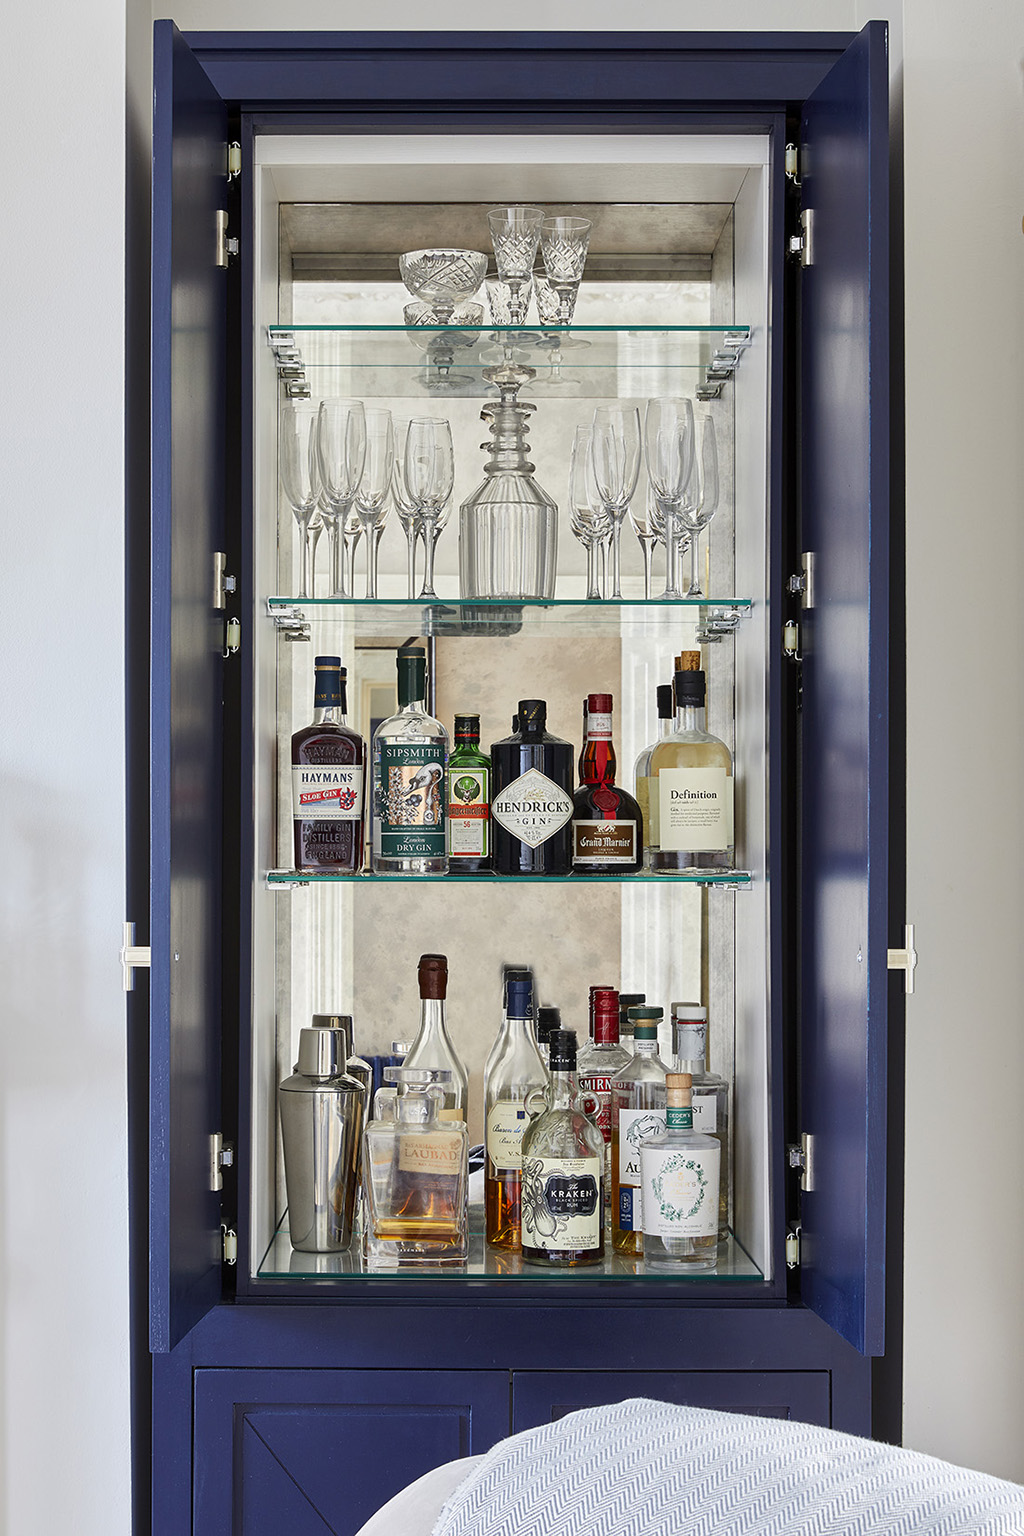 Home decorating ideas with a bespoke bar